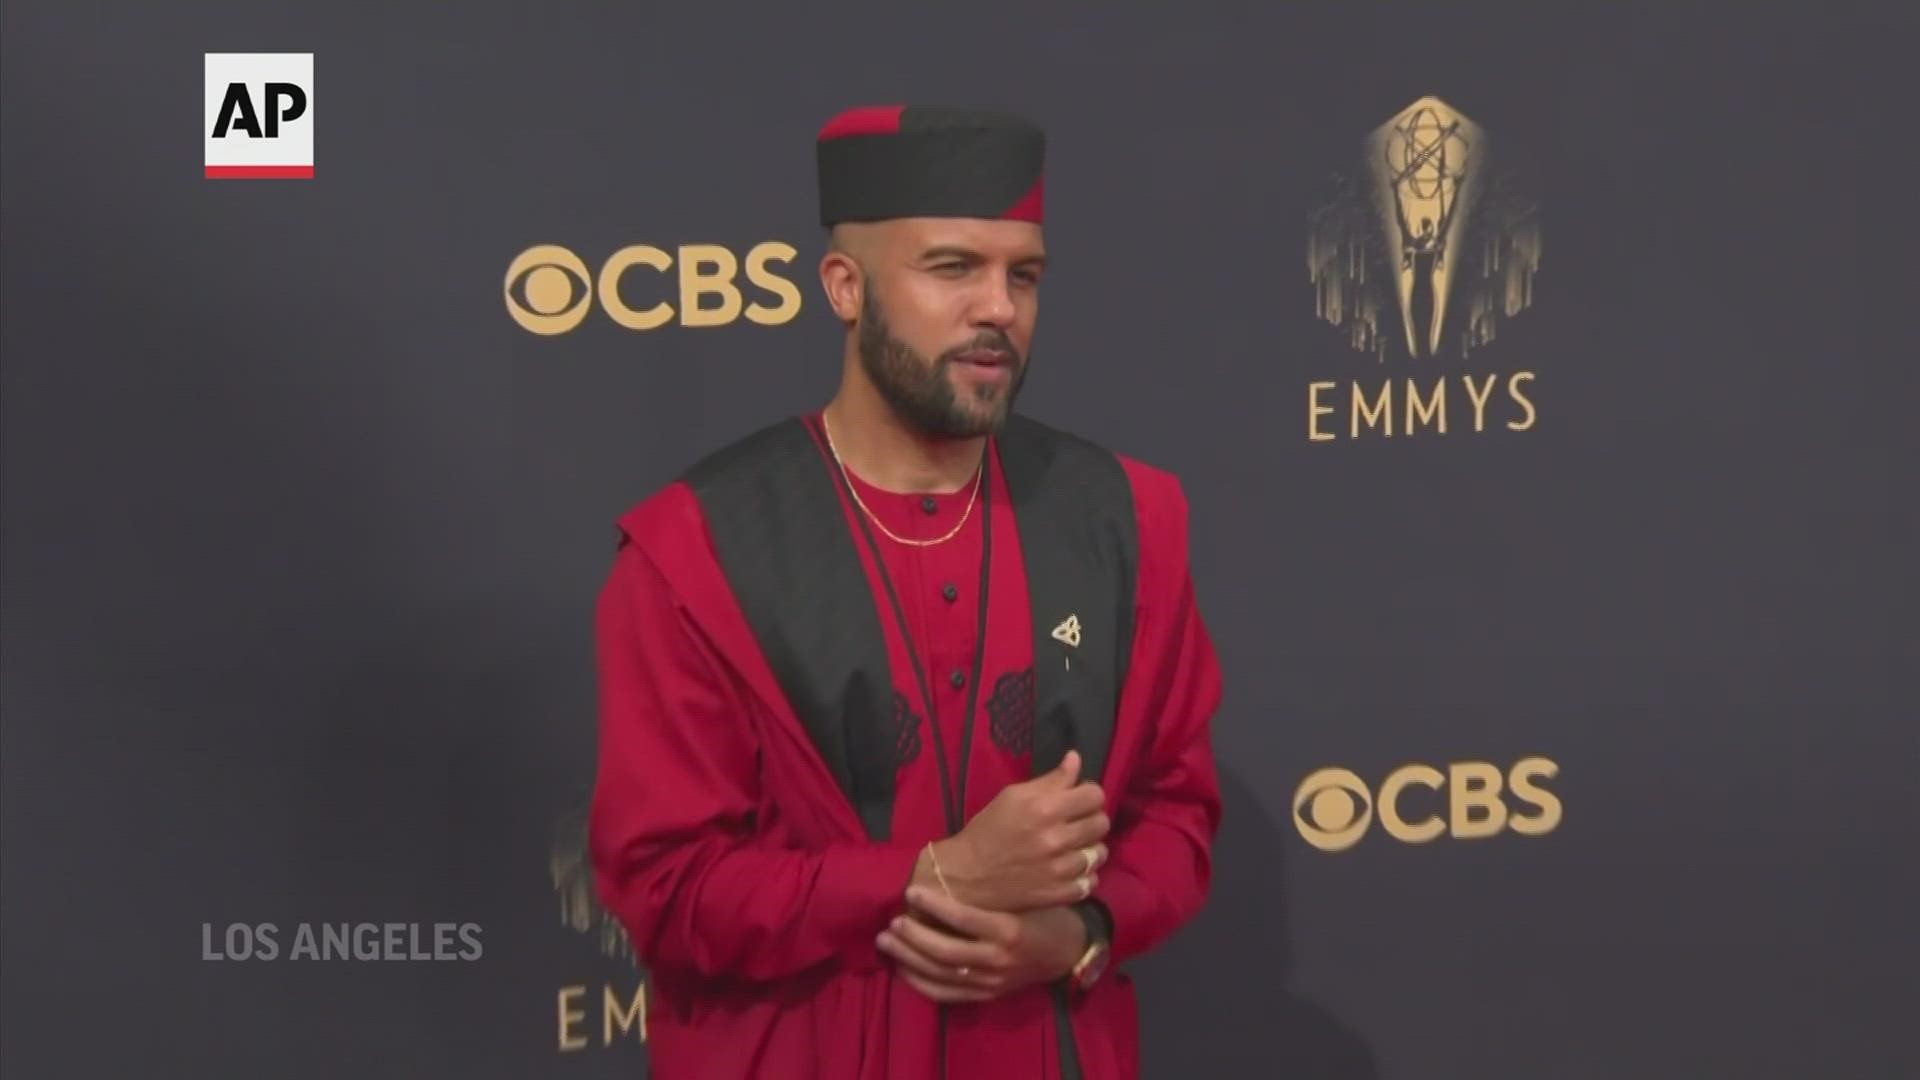 Austin Taylor Hd 1080 - Emmys Red Carpet: Nicole Byer stuns, Billy Porter winged outfit | kvue.com